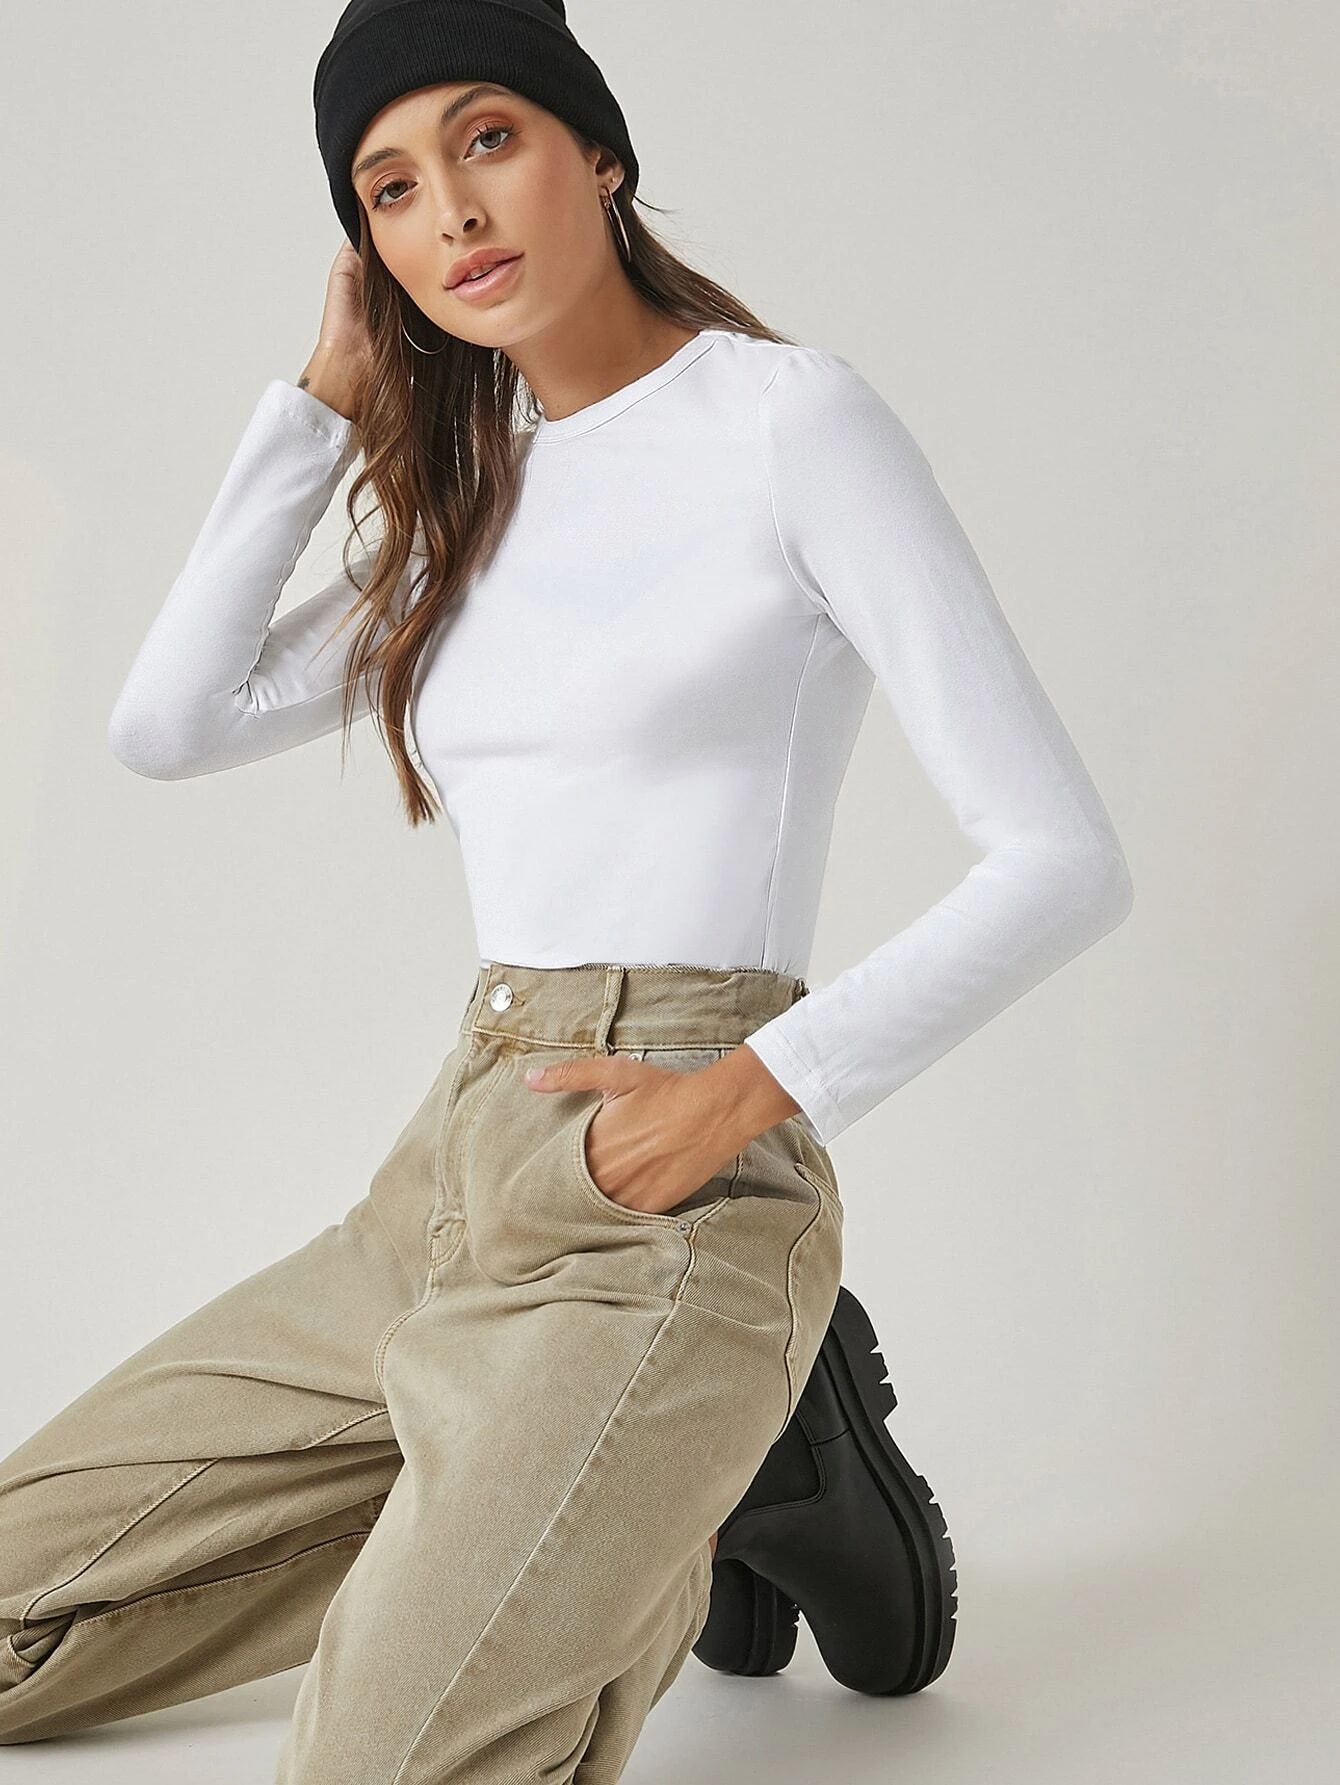 SHEIN BASICS Solid Form Fitted Tee | SHEIN